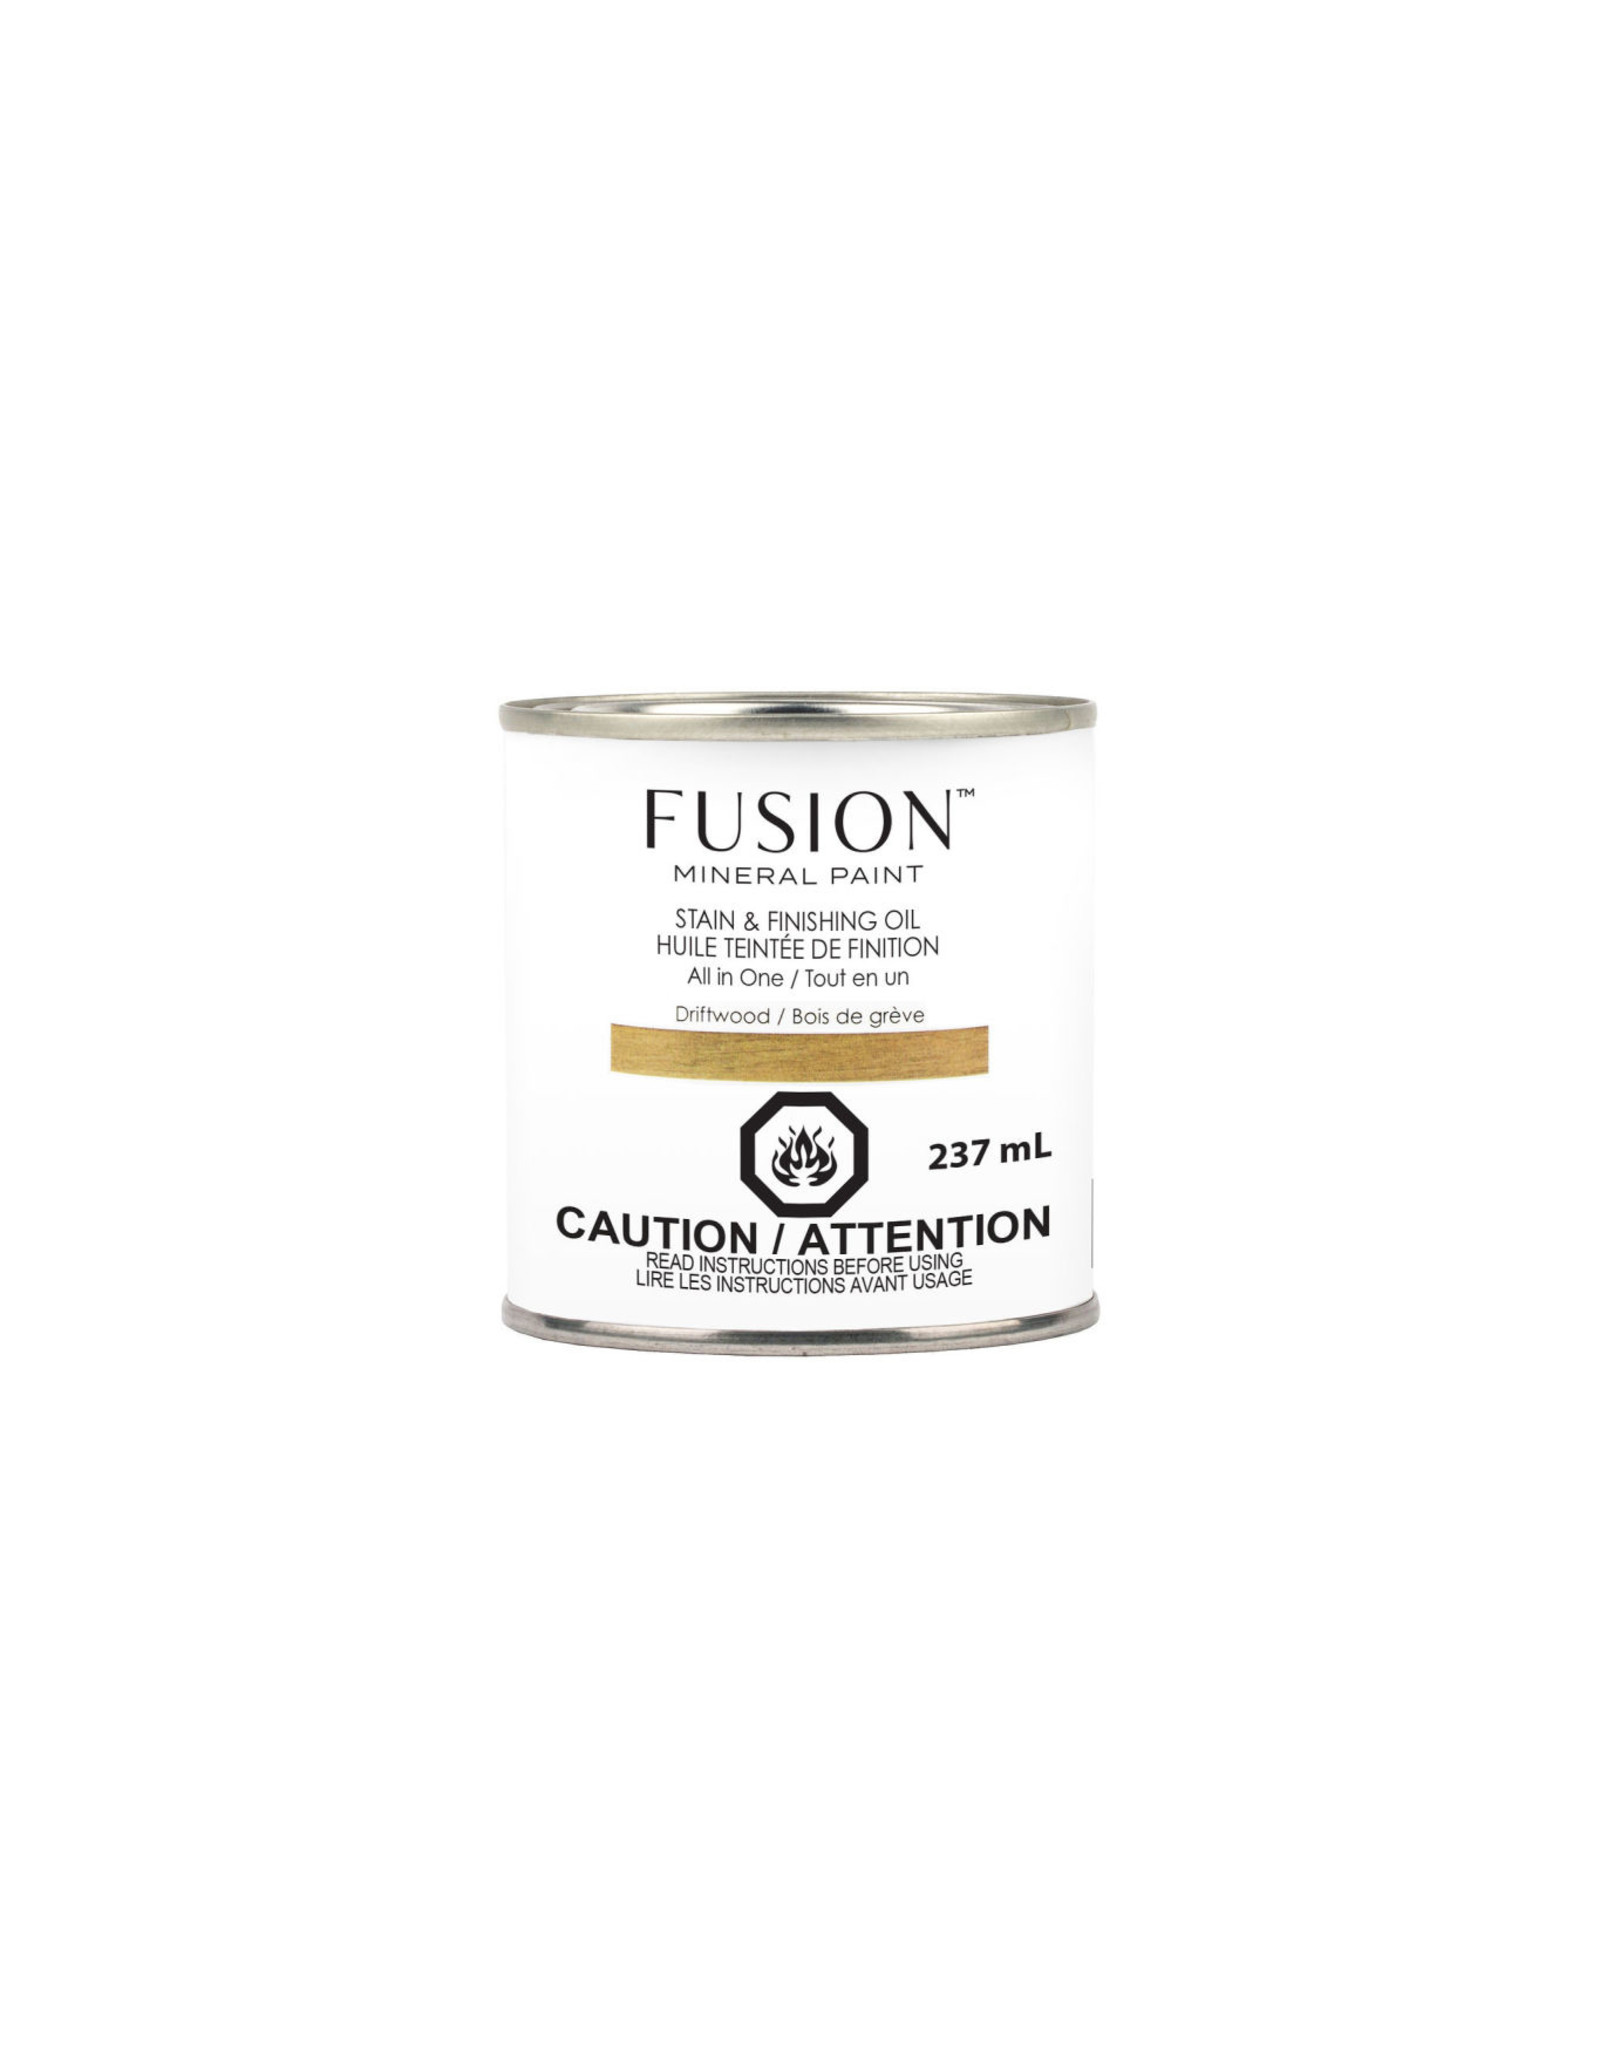 Fusion Mineral Paint Stain & Finishing Oil - Driftwood